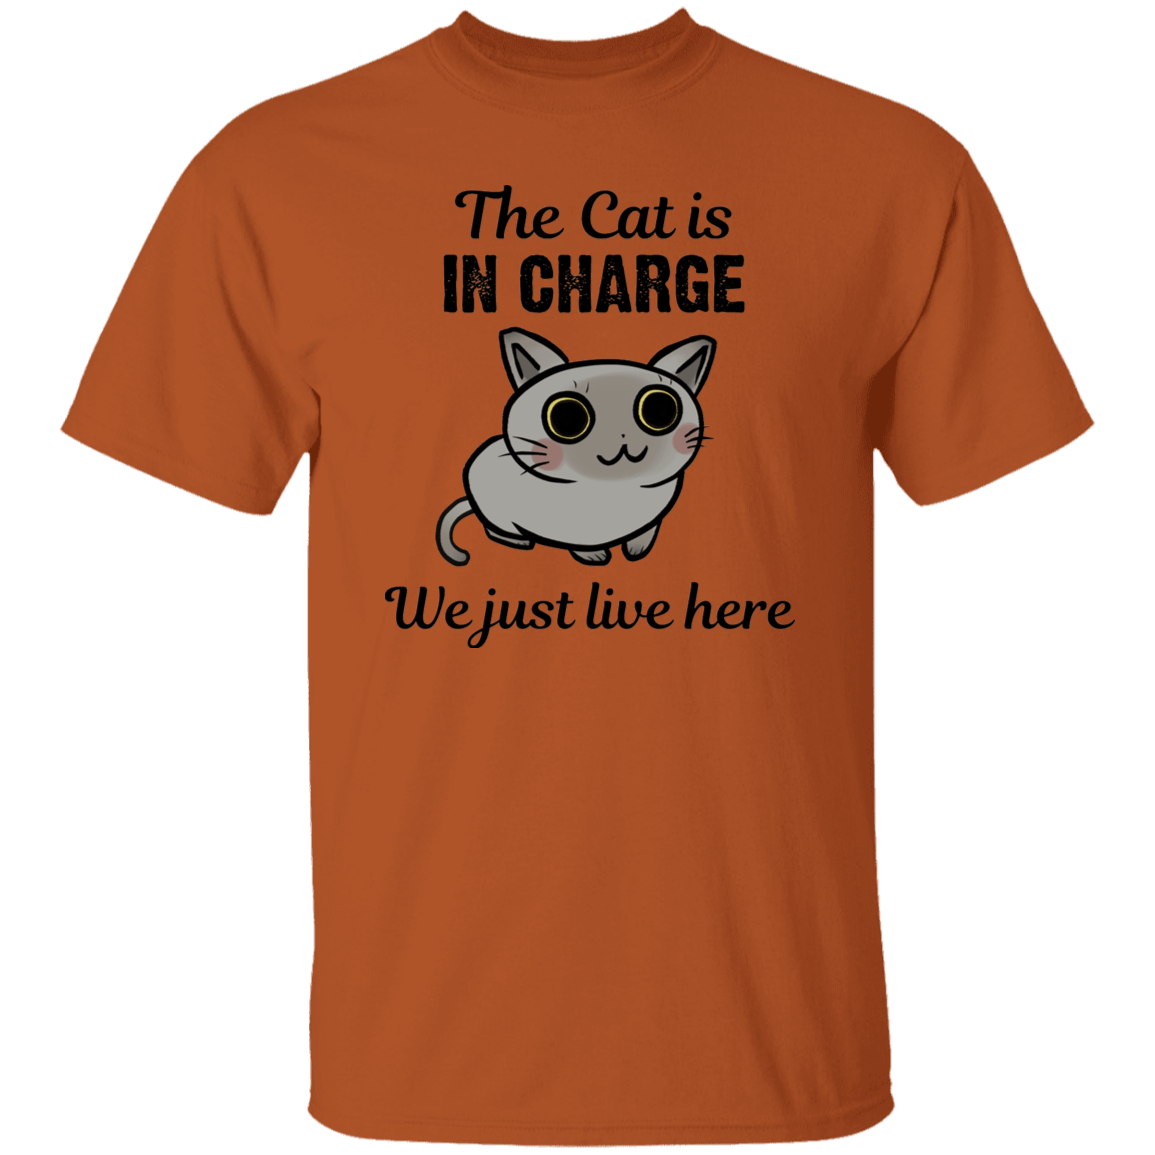 The Cat is in Charge - T-Shirt.